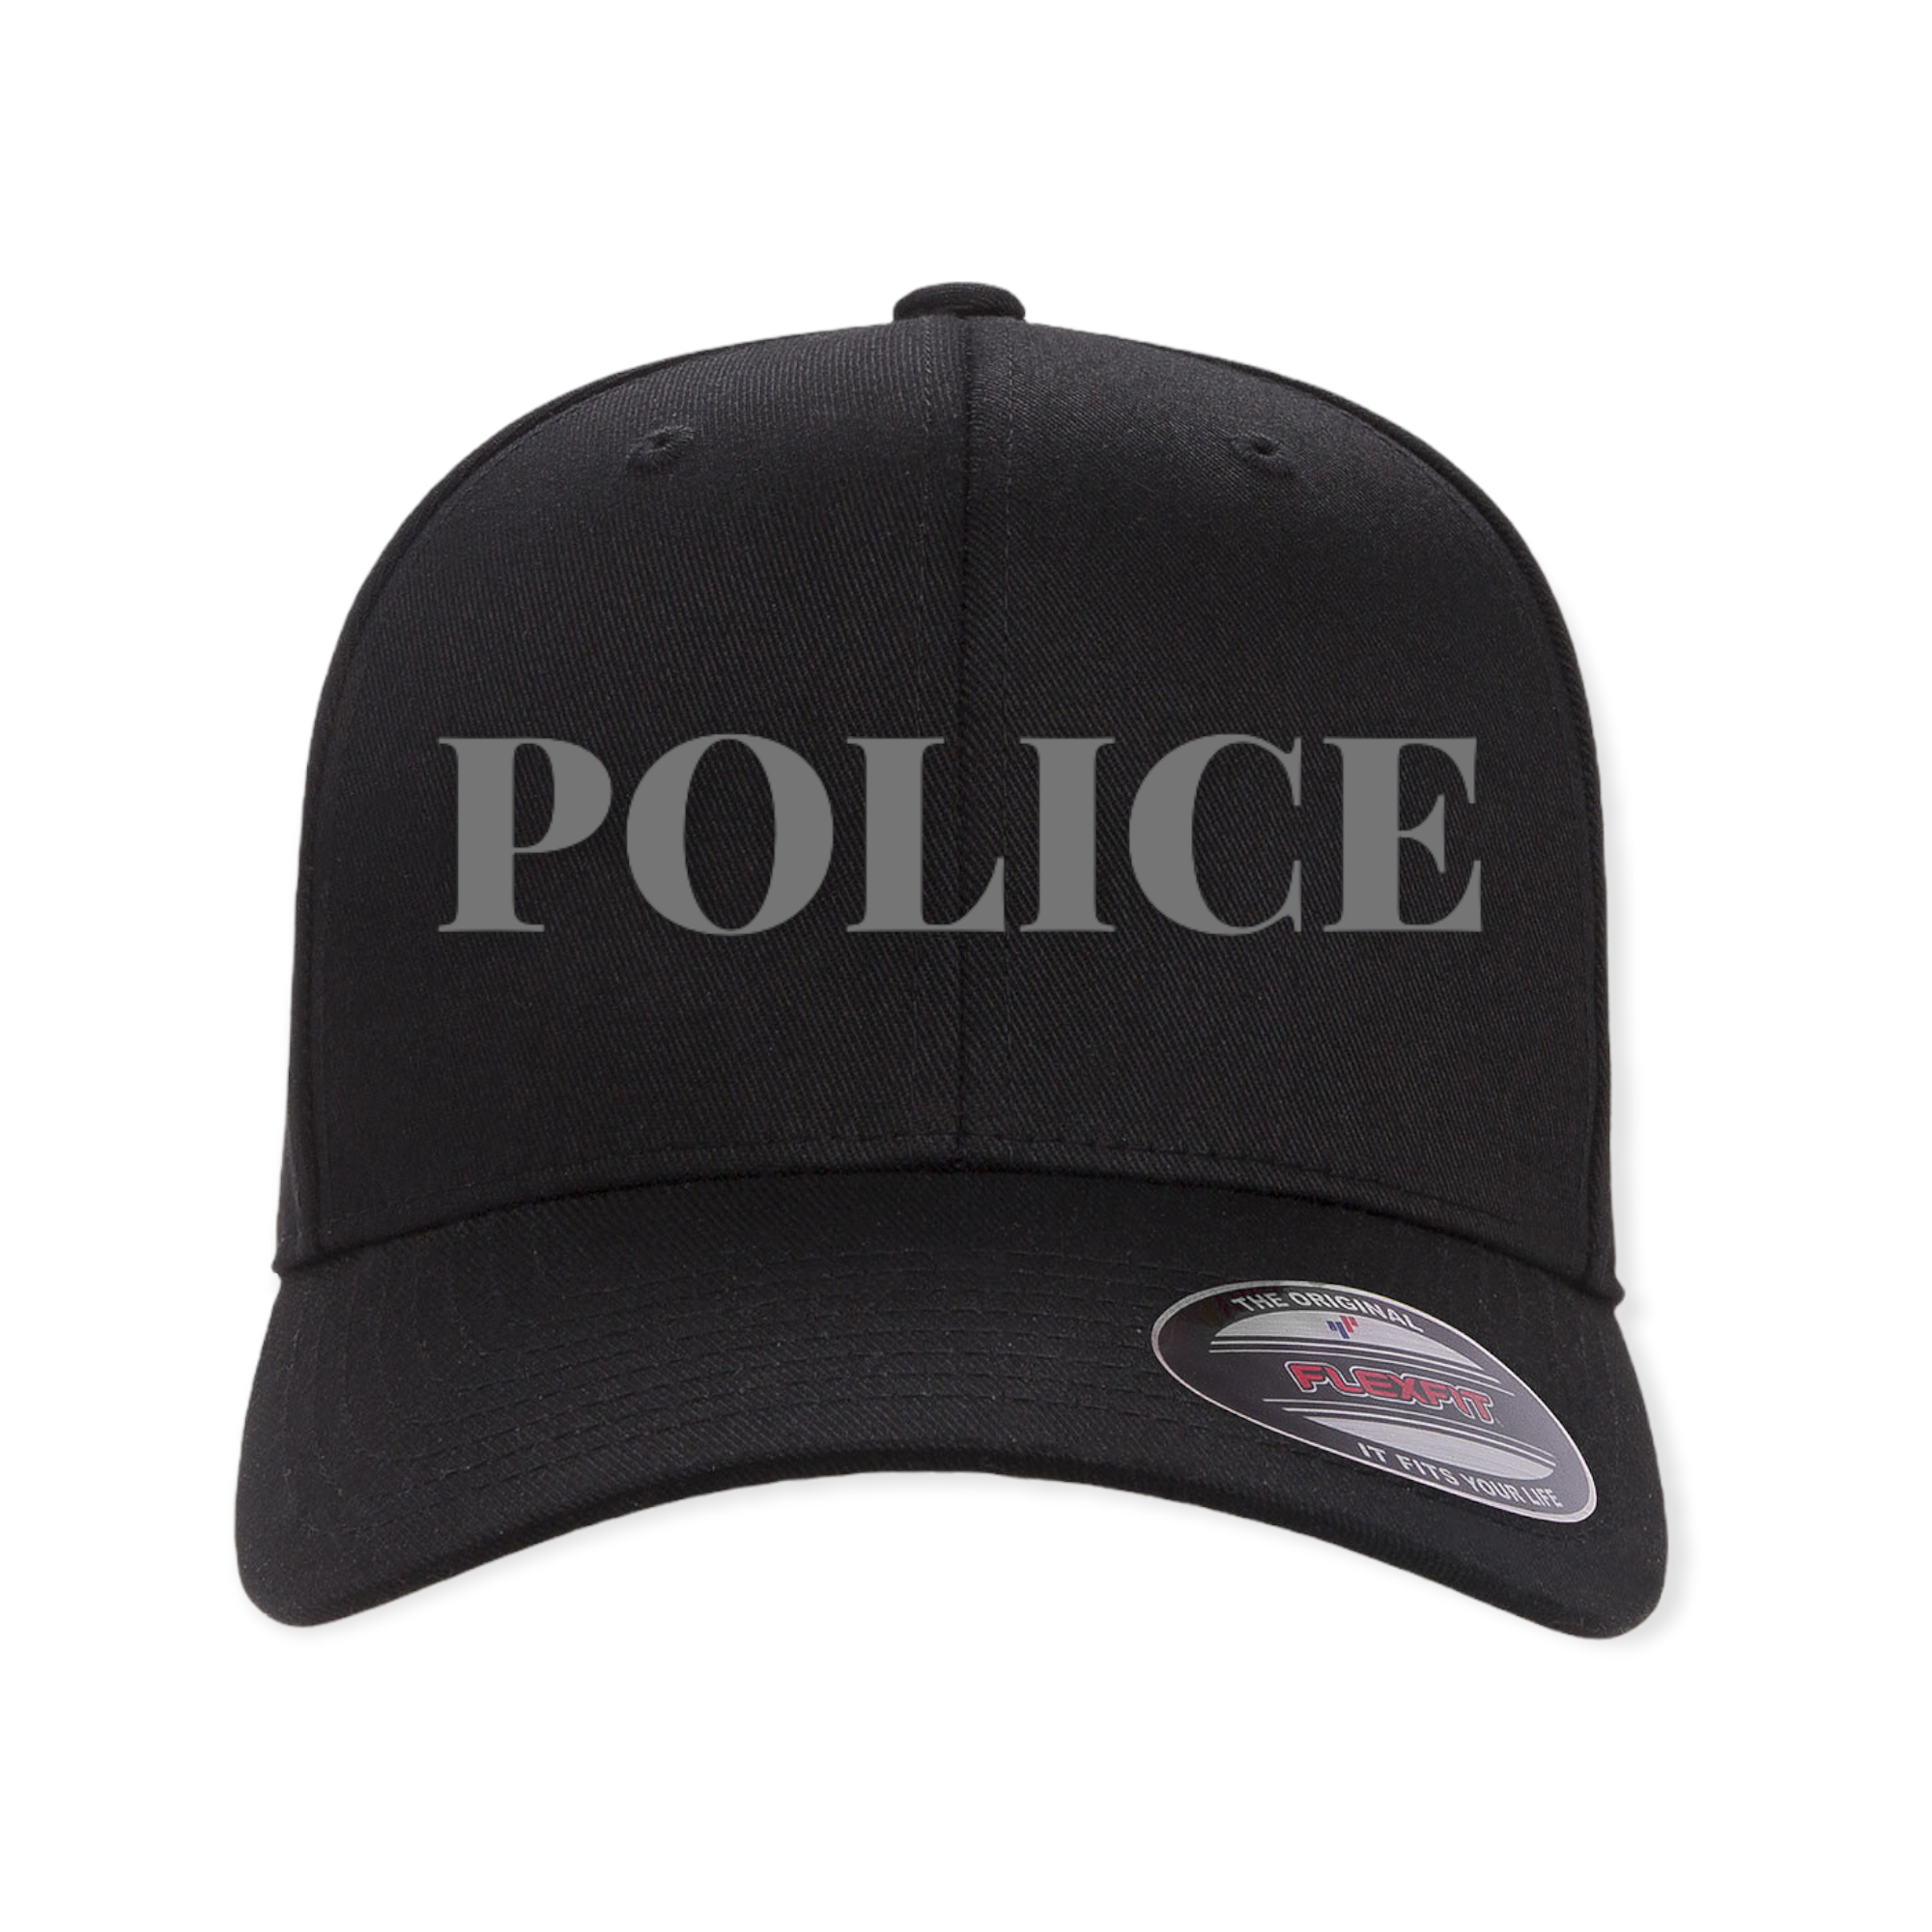 POLICE Wooly Combed Ball Cap